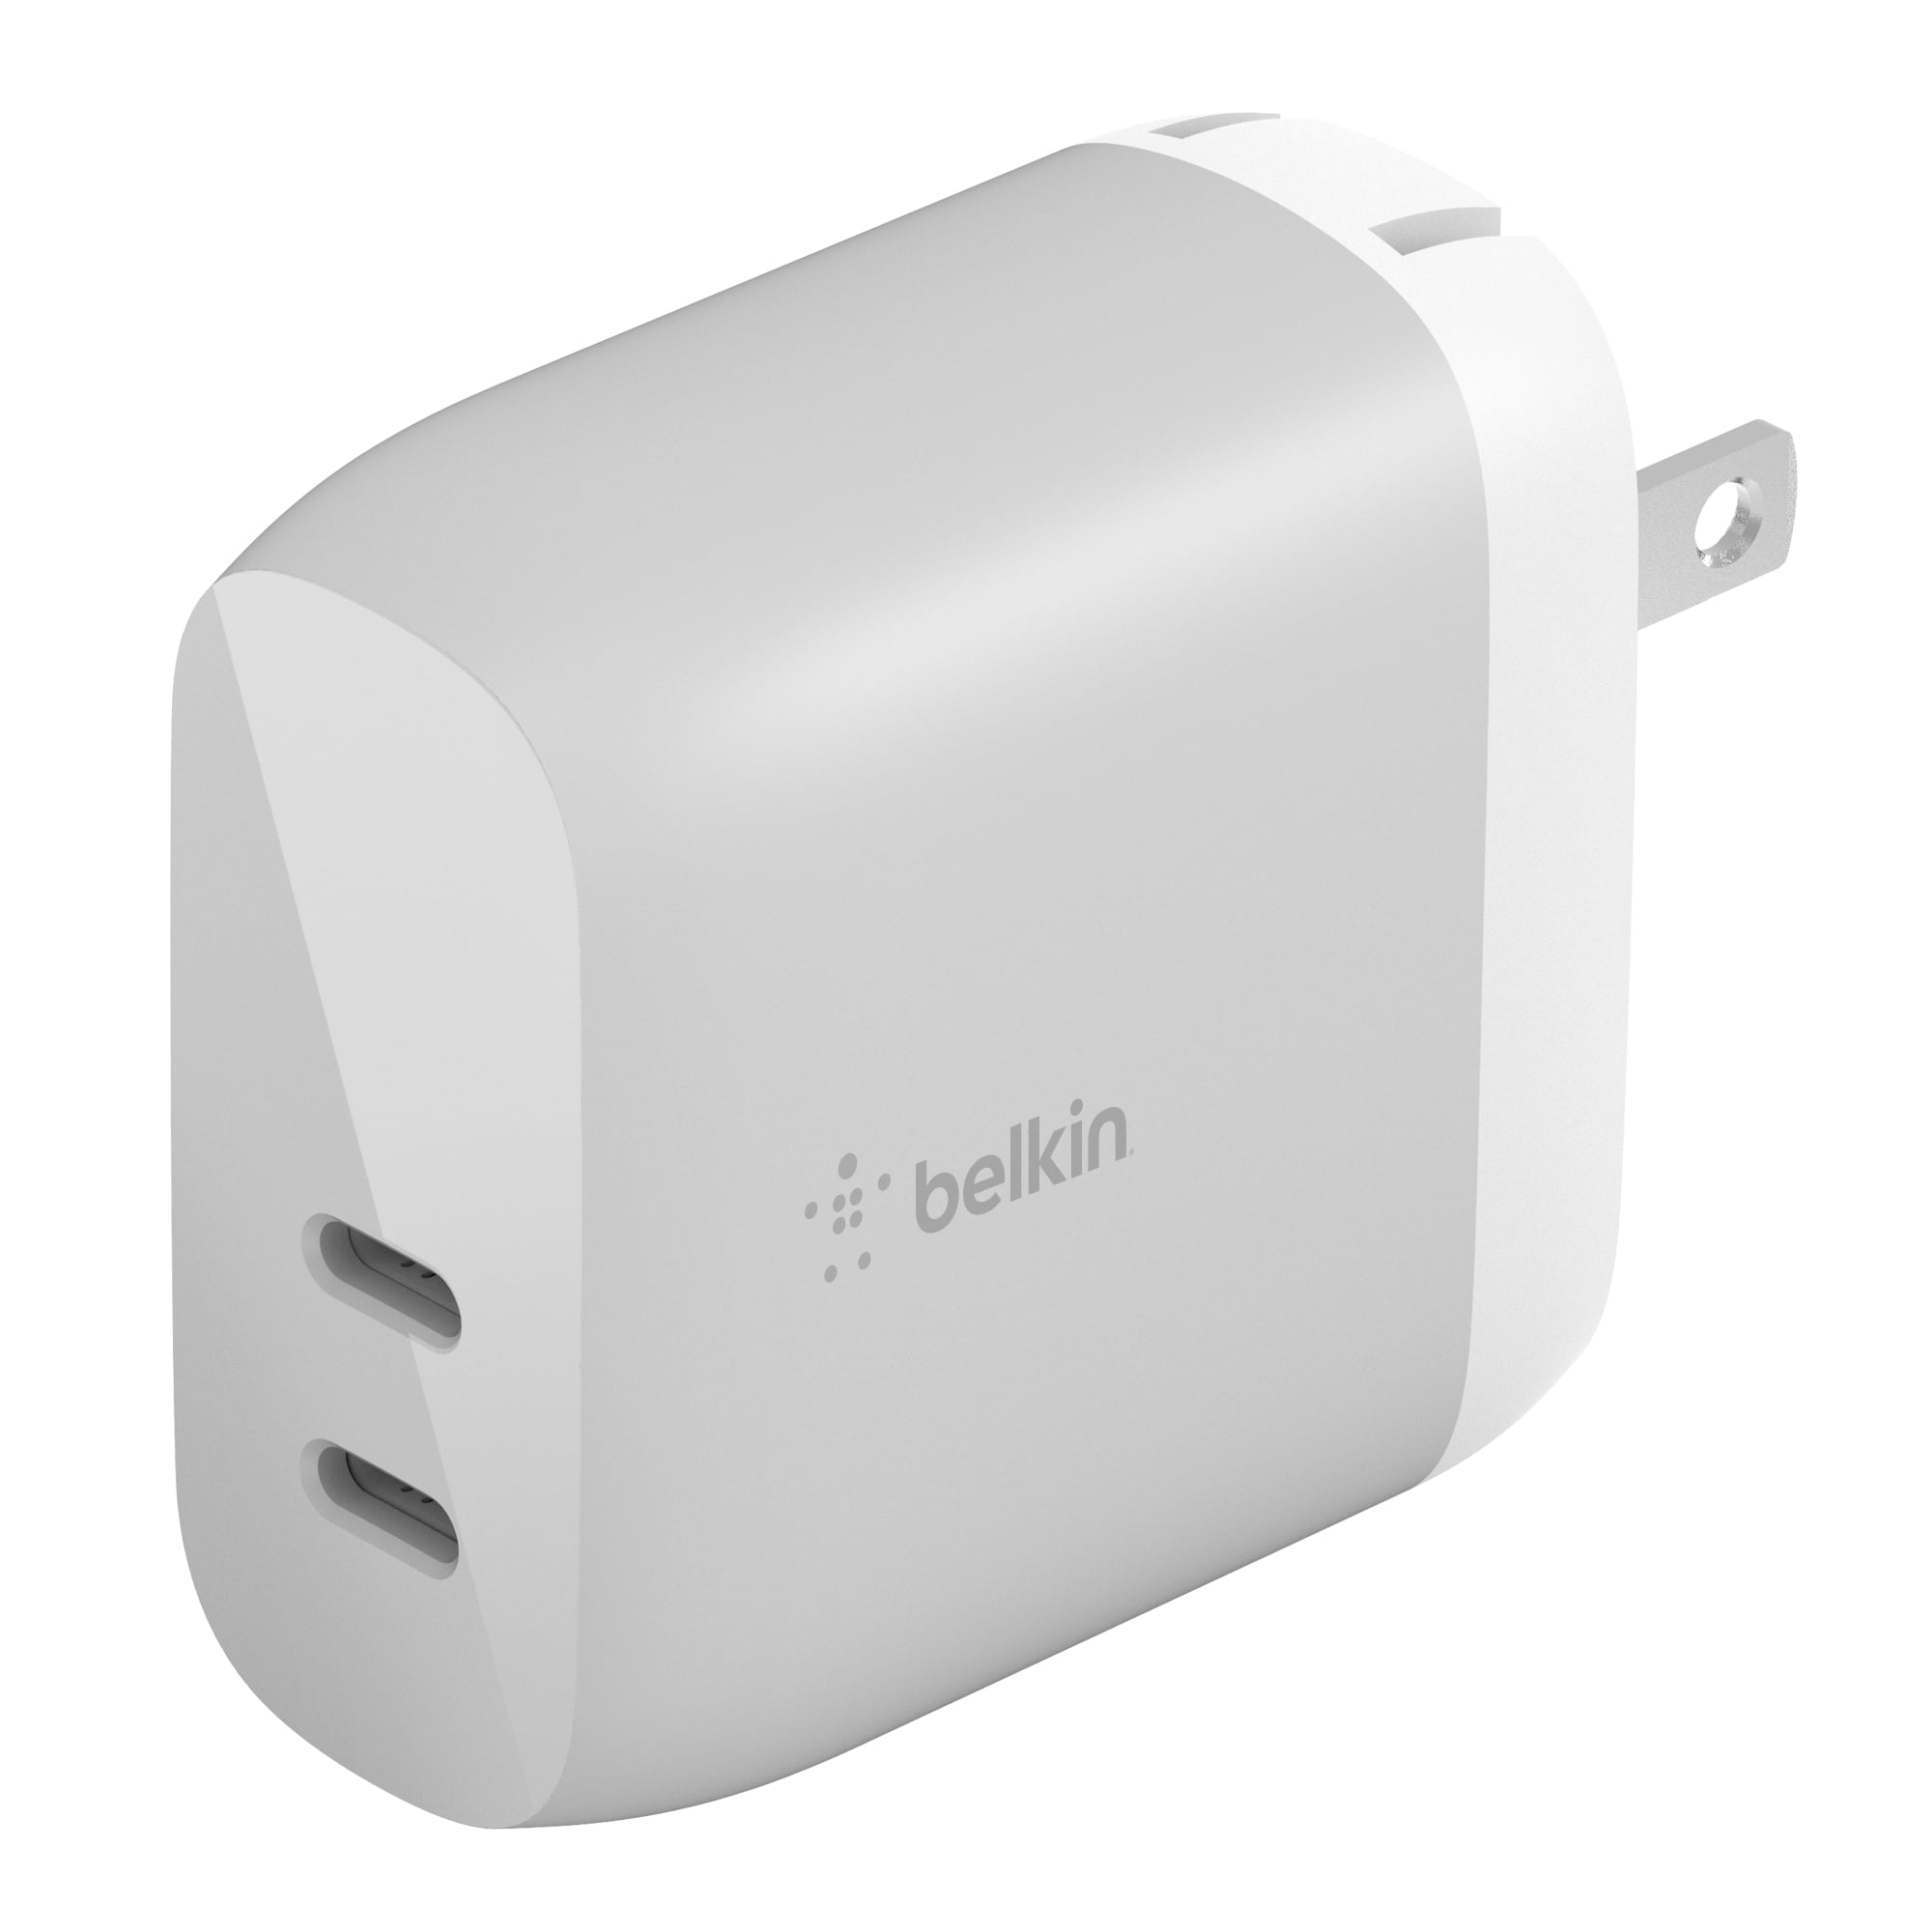 Belkin 40W Dual Port USB C Wall Charger - USB Type C, Fast Charging for iPhone 14, 14 Pro, 14 Pro Max, 13, 13 Pro, 13 Pro Max, Galaxy S21 Ultra, iPad, AirPods & More - Silver